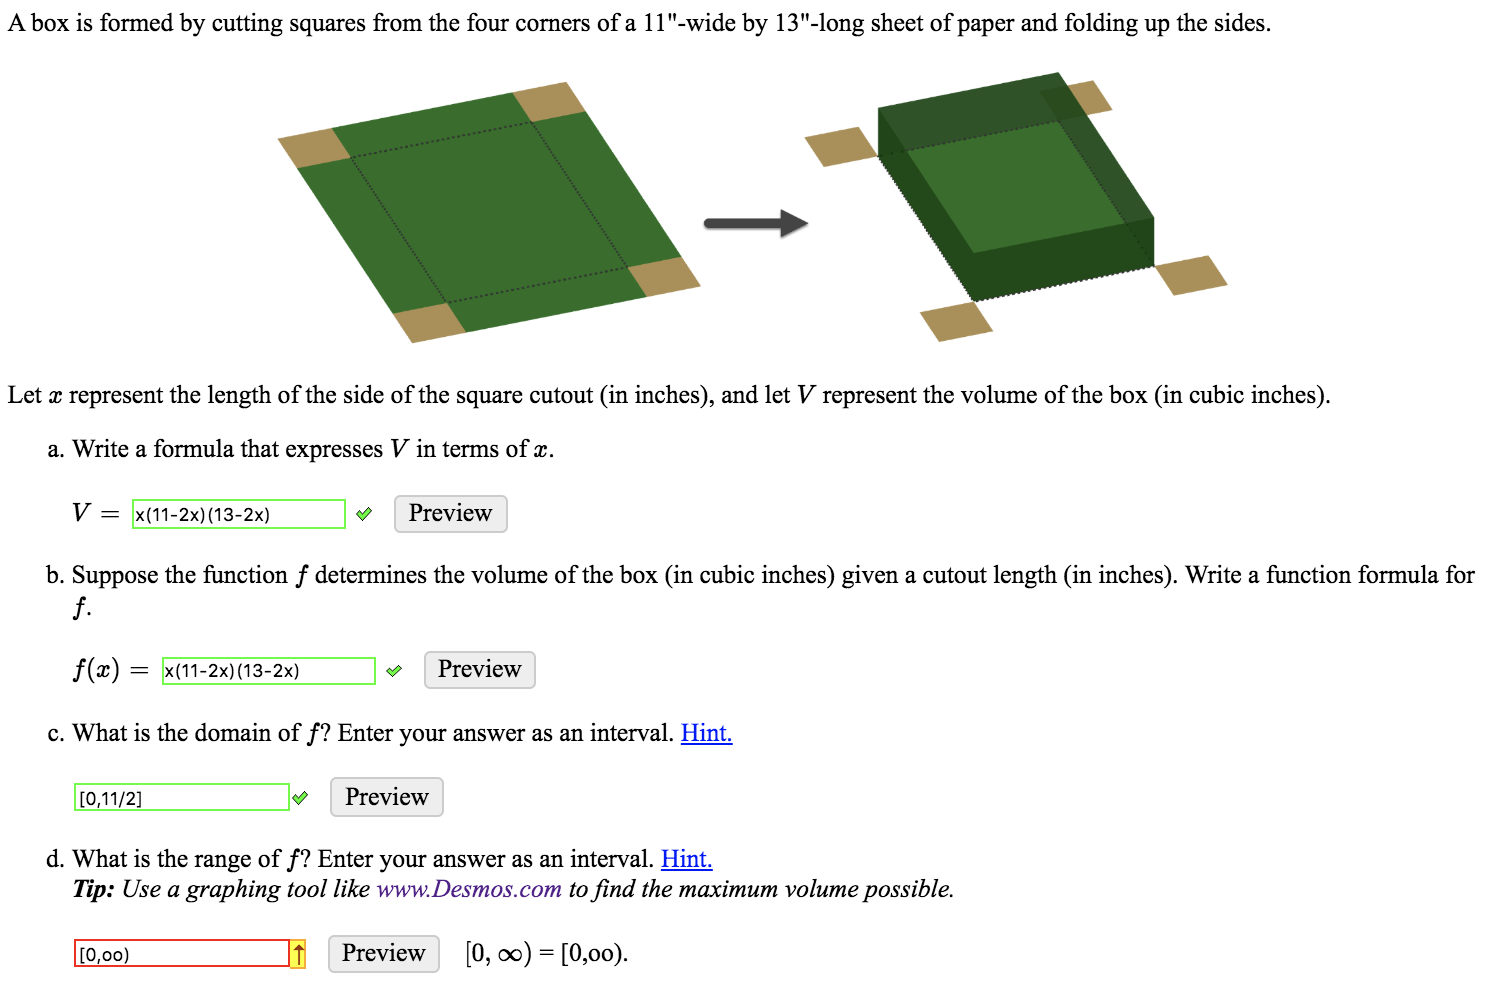 A box is formed by cutting squares from the four corners of a 11"-wide by 13"-long sheet of paper and folding up the sides.
Let x represent the length of the side of the square cutout (in inches), and let V represent the volume of the box (in cubic inches).
a. Write a formula that expresses V in terms of x.
V = x(11-2x) (13-2x)
Preview
b. Suppose the function f determines the volume of the box (in cubic inches) given a cutout length (in inches). Write a function formula for
f.
f(x)
Preview
x(11-2x) (13-2x)
c. What is the domain of f? Enter your answer as an interval. Hint.
Preview
[0,11/2]
d. What is the range of f? Enter your answer as an interval. Hint
Tip: Use a graphing tool like www.Desmos.com to find the maximum volume possible.
[0, oo) [0,00)
Preview
[0,00)
